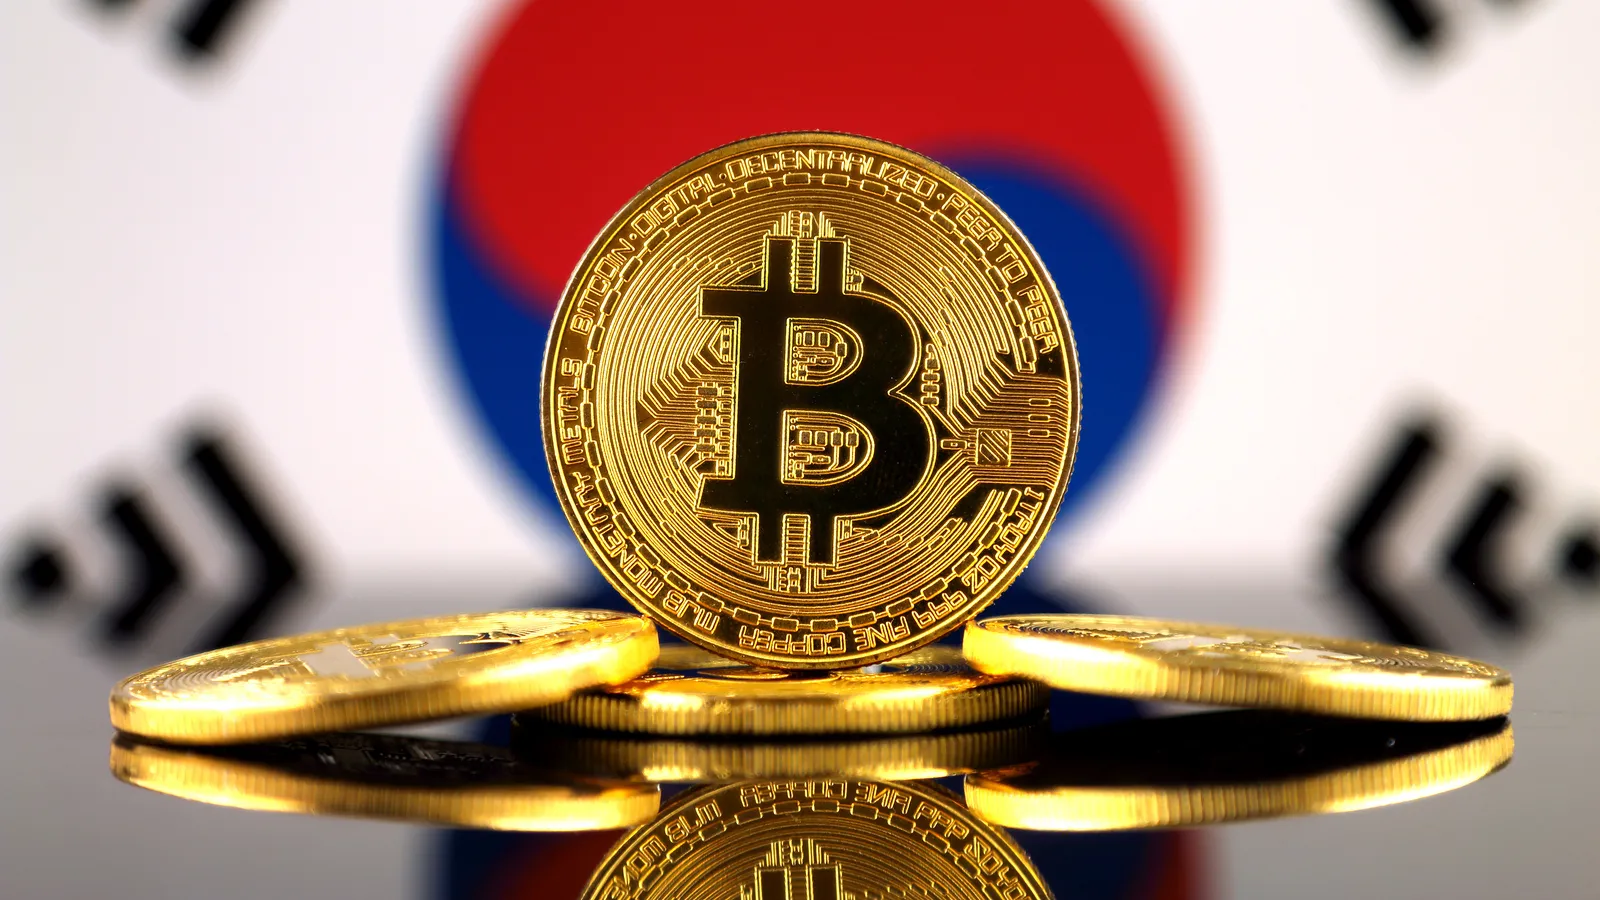 Filecoin Tops 24-Hour Gains, South Korean Exchanges Propel Bitcoin SV